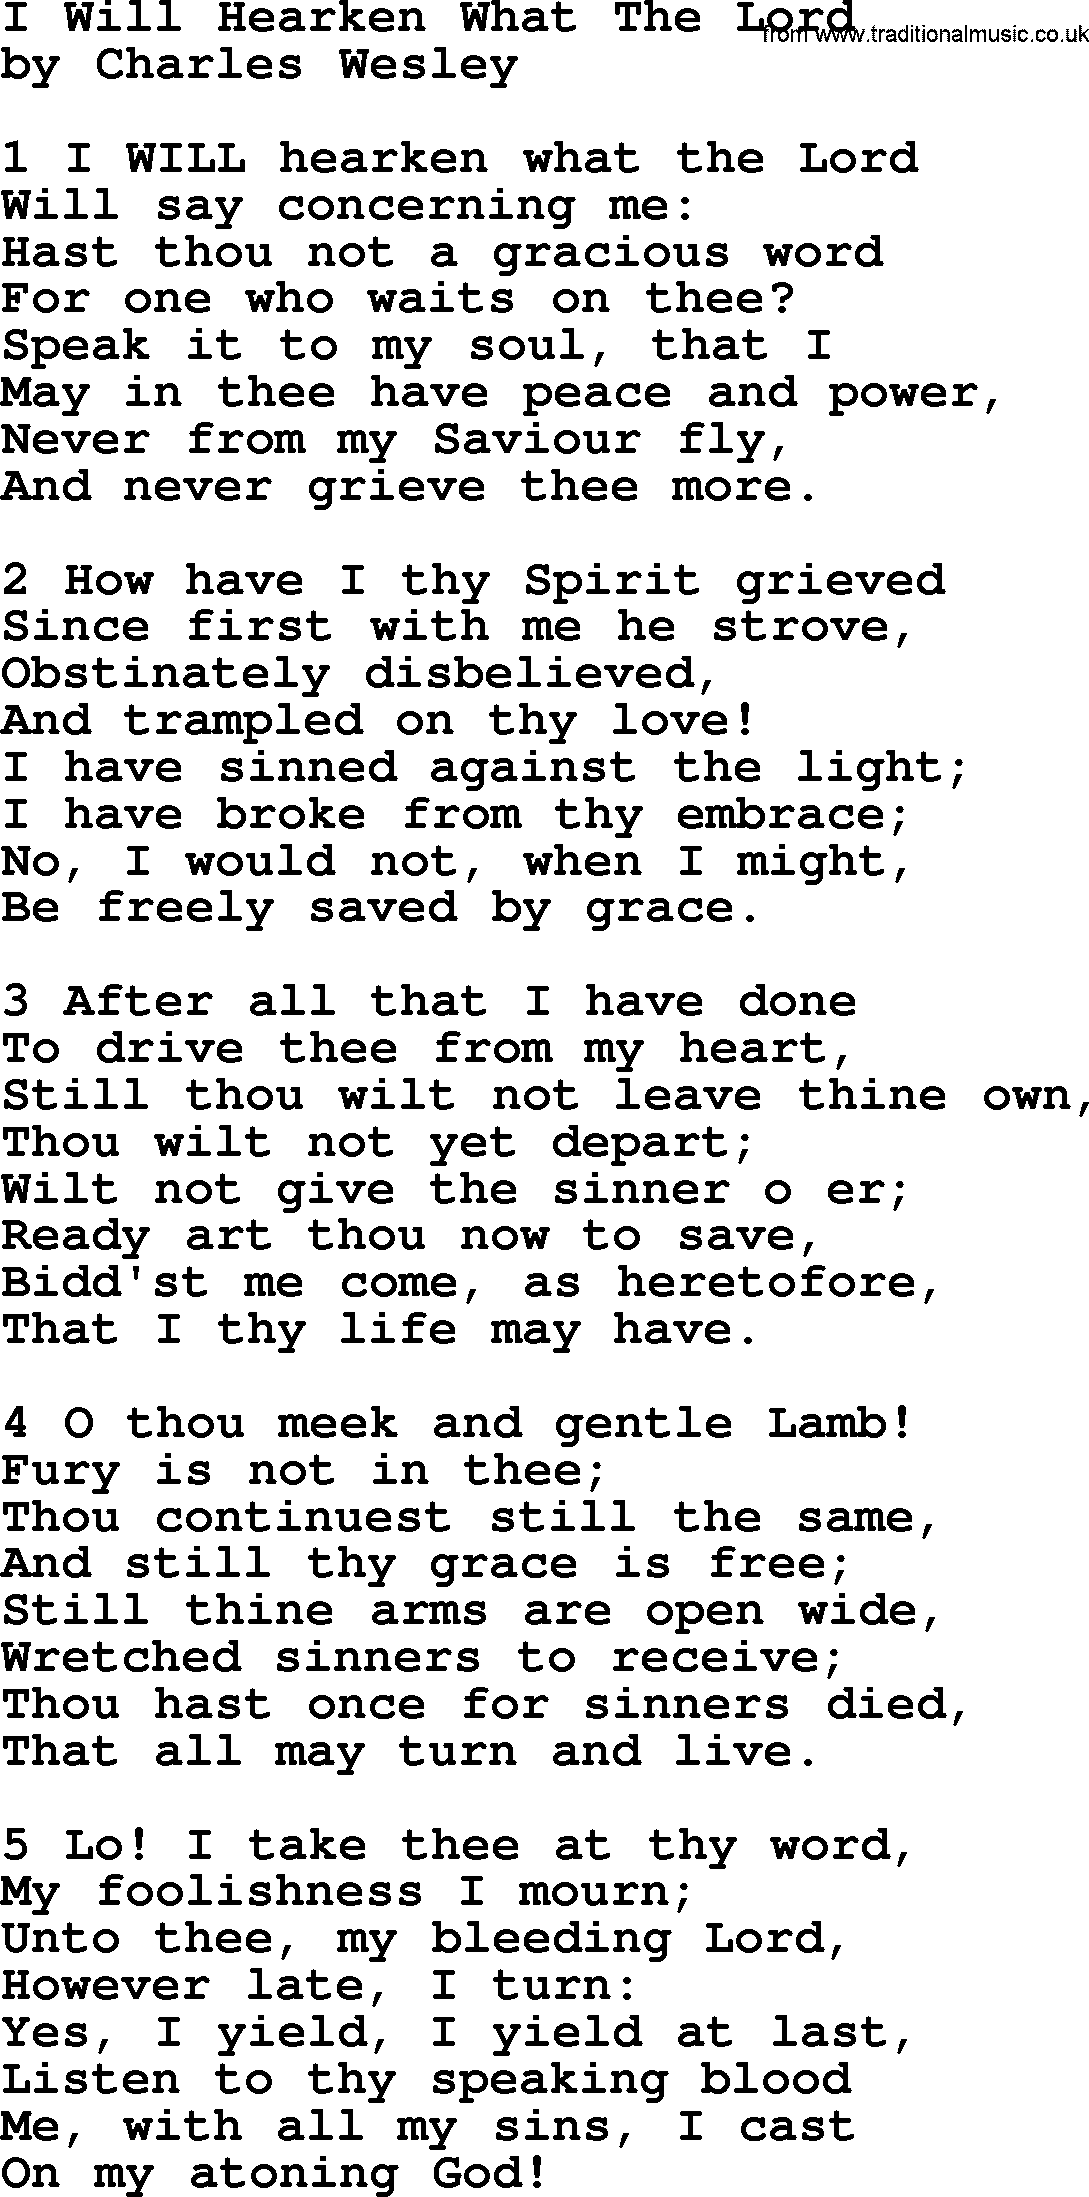 Charles Wesley hymn: I Will Hearken What The Lord, lyrics